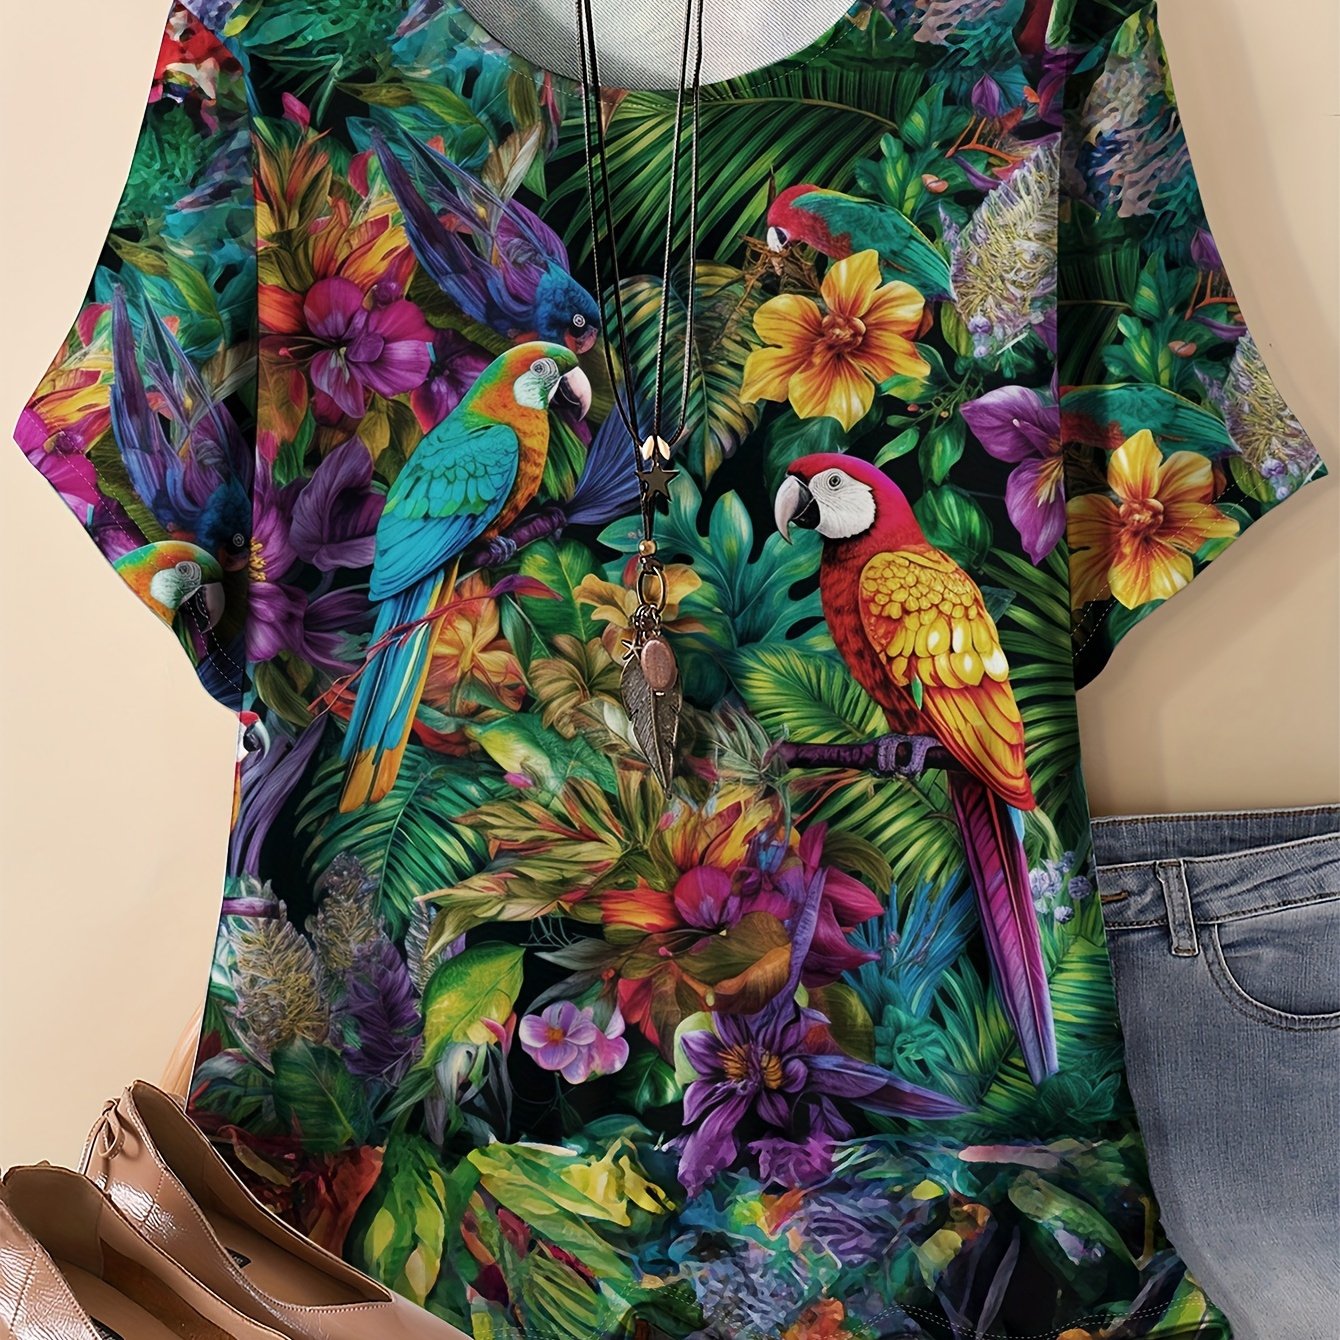 

Plus Size Parrot & Floral Print T-shirt, Casual Crew Neck Short Sleeve Top For Spring & Summer, Women's Plus Size Clothing